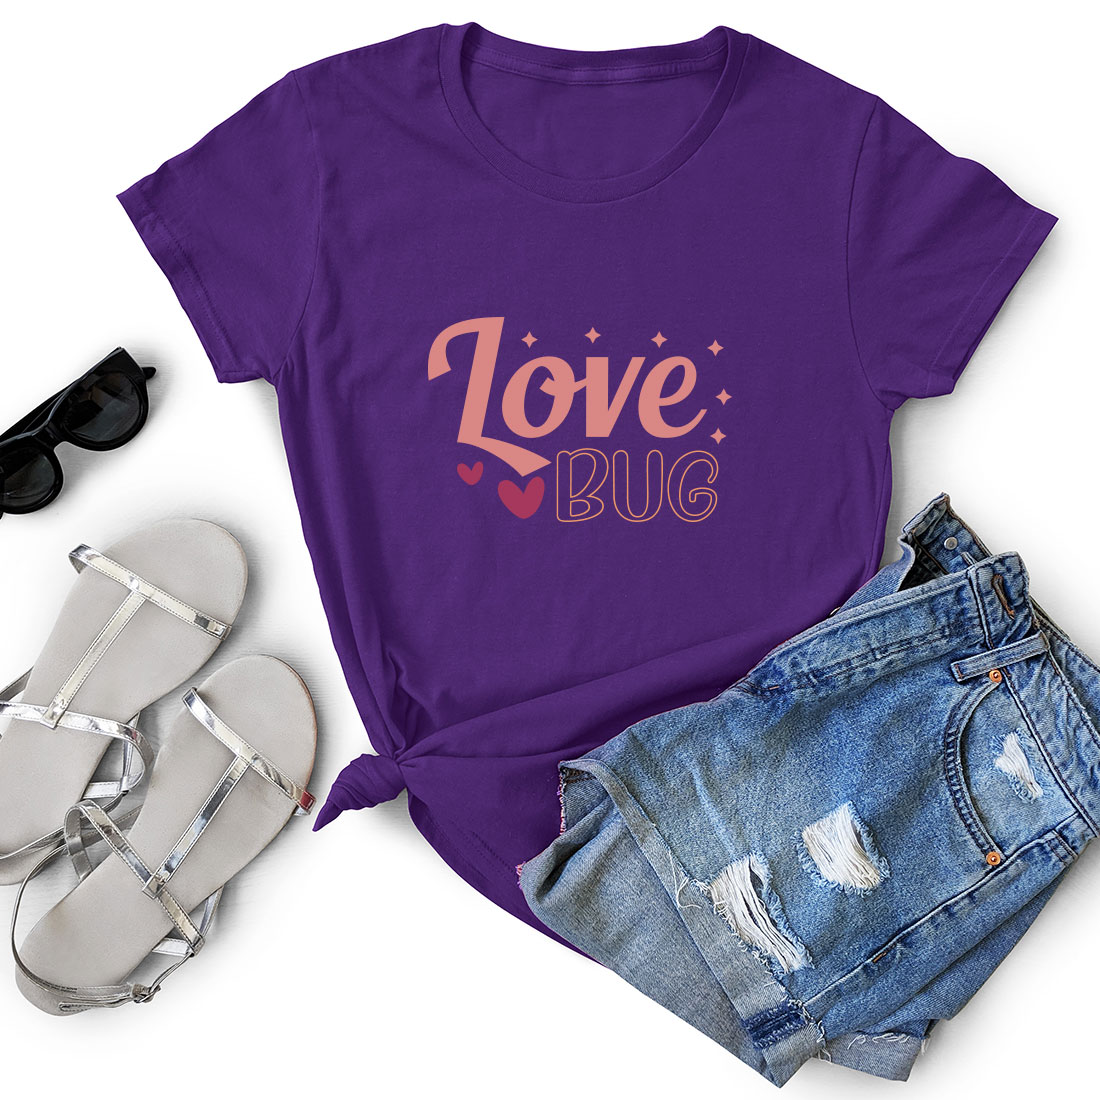 T - shirt that says love bug next to a pair of shorts.